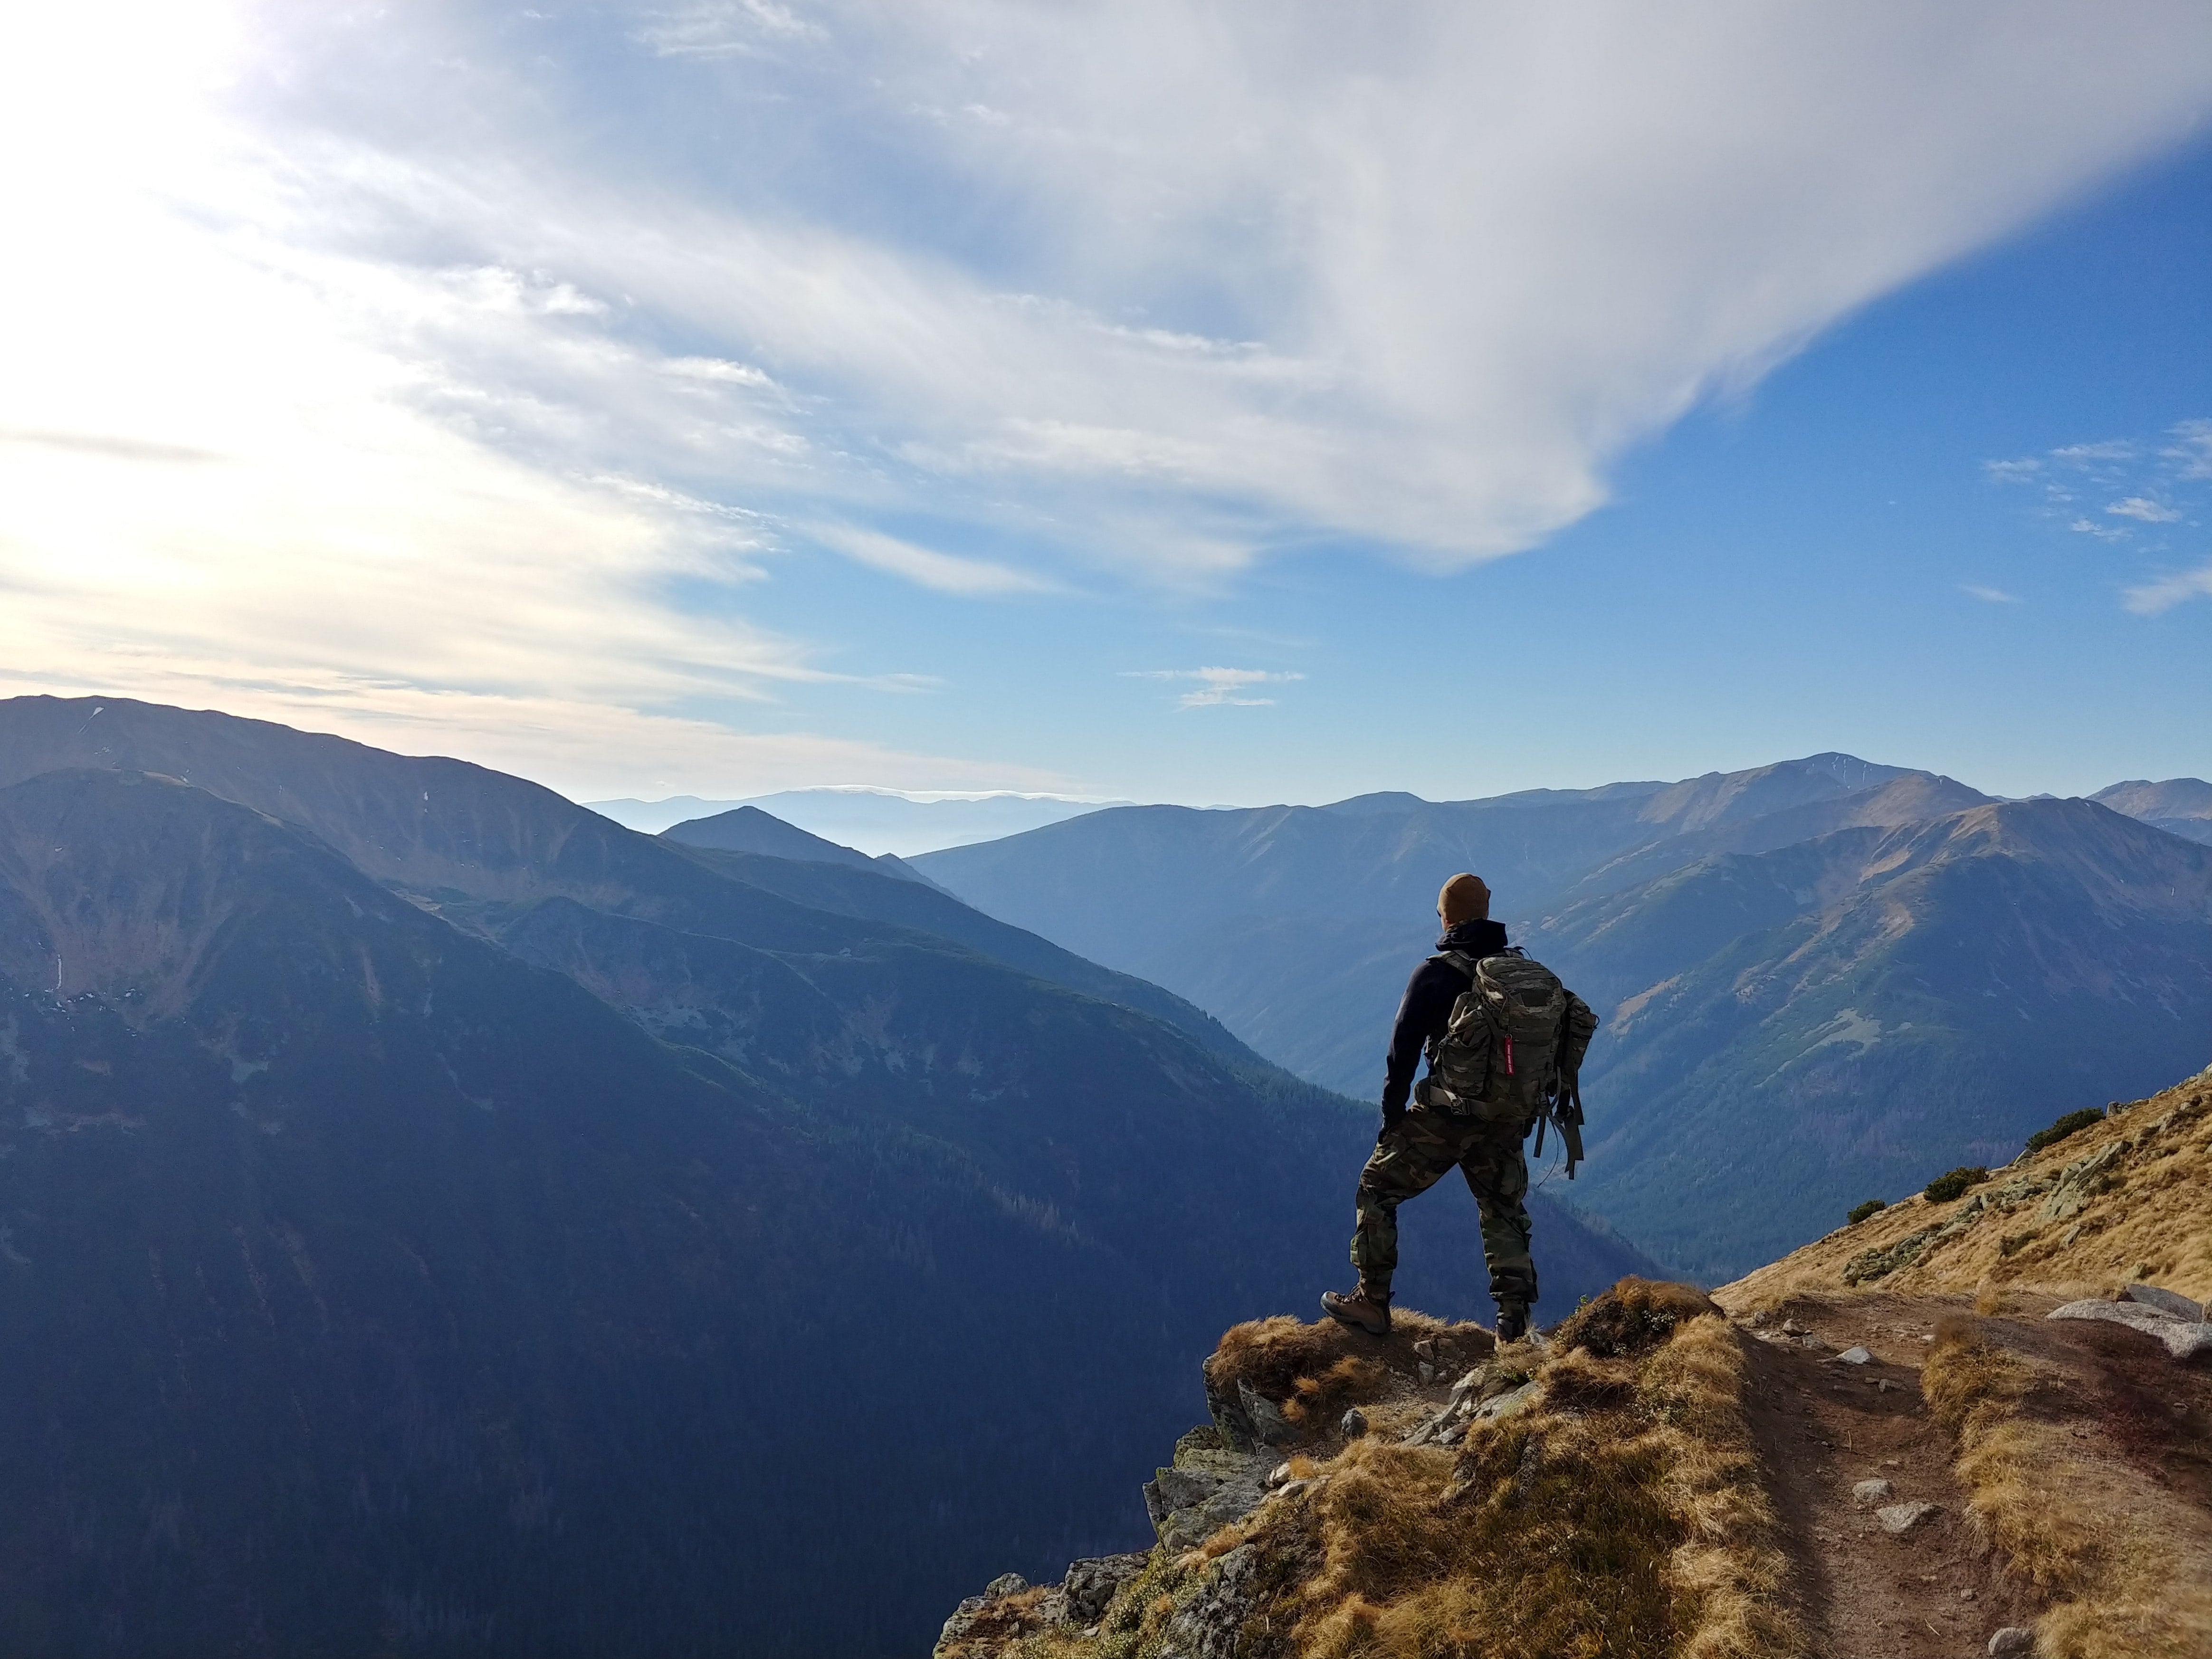 a hiker looking at the view of the mountain range